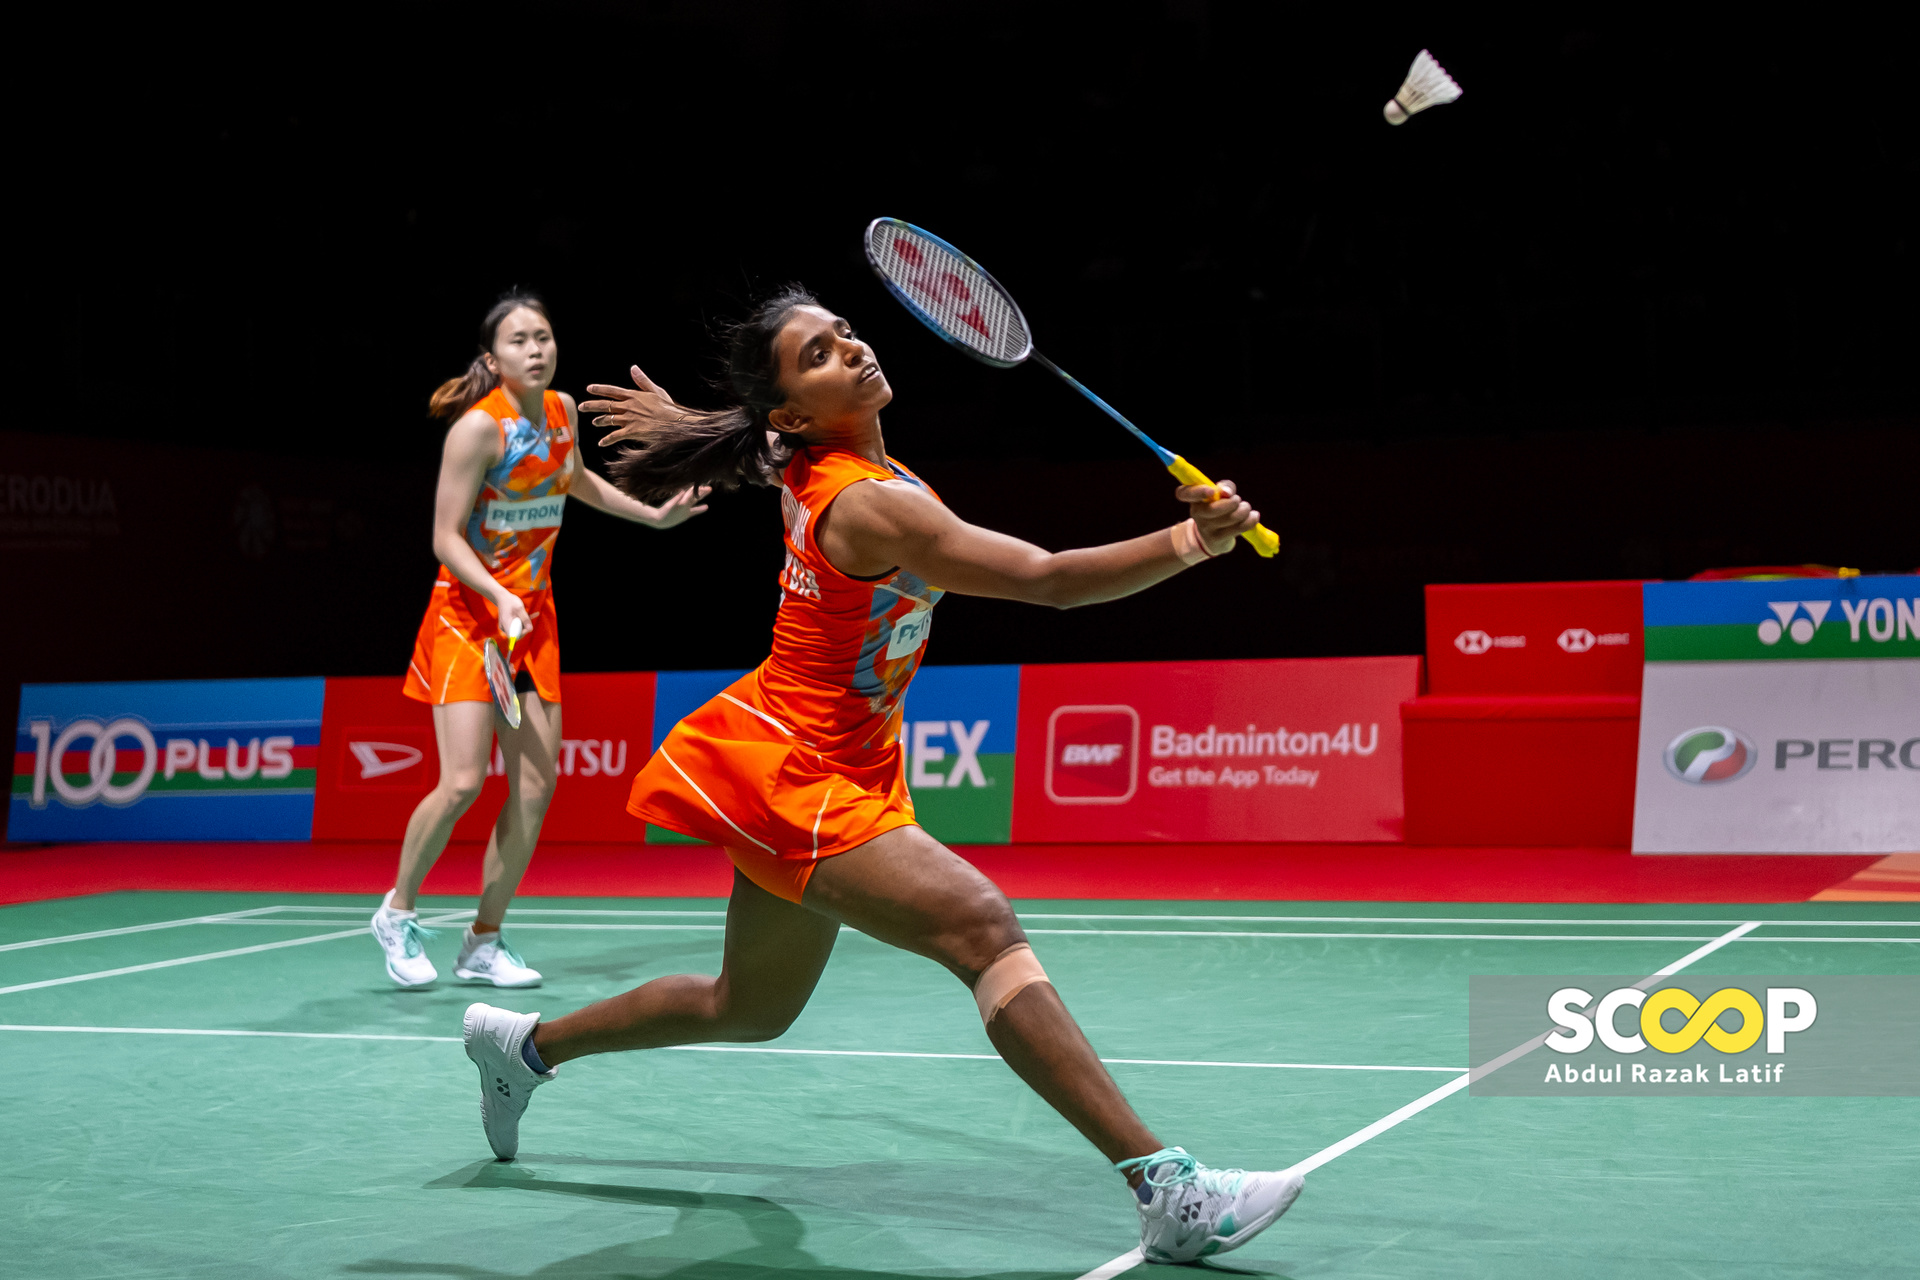 No regrets: Thinaah's bold move from singles to doubles pays off with Olympic debut with Pearly